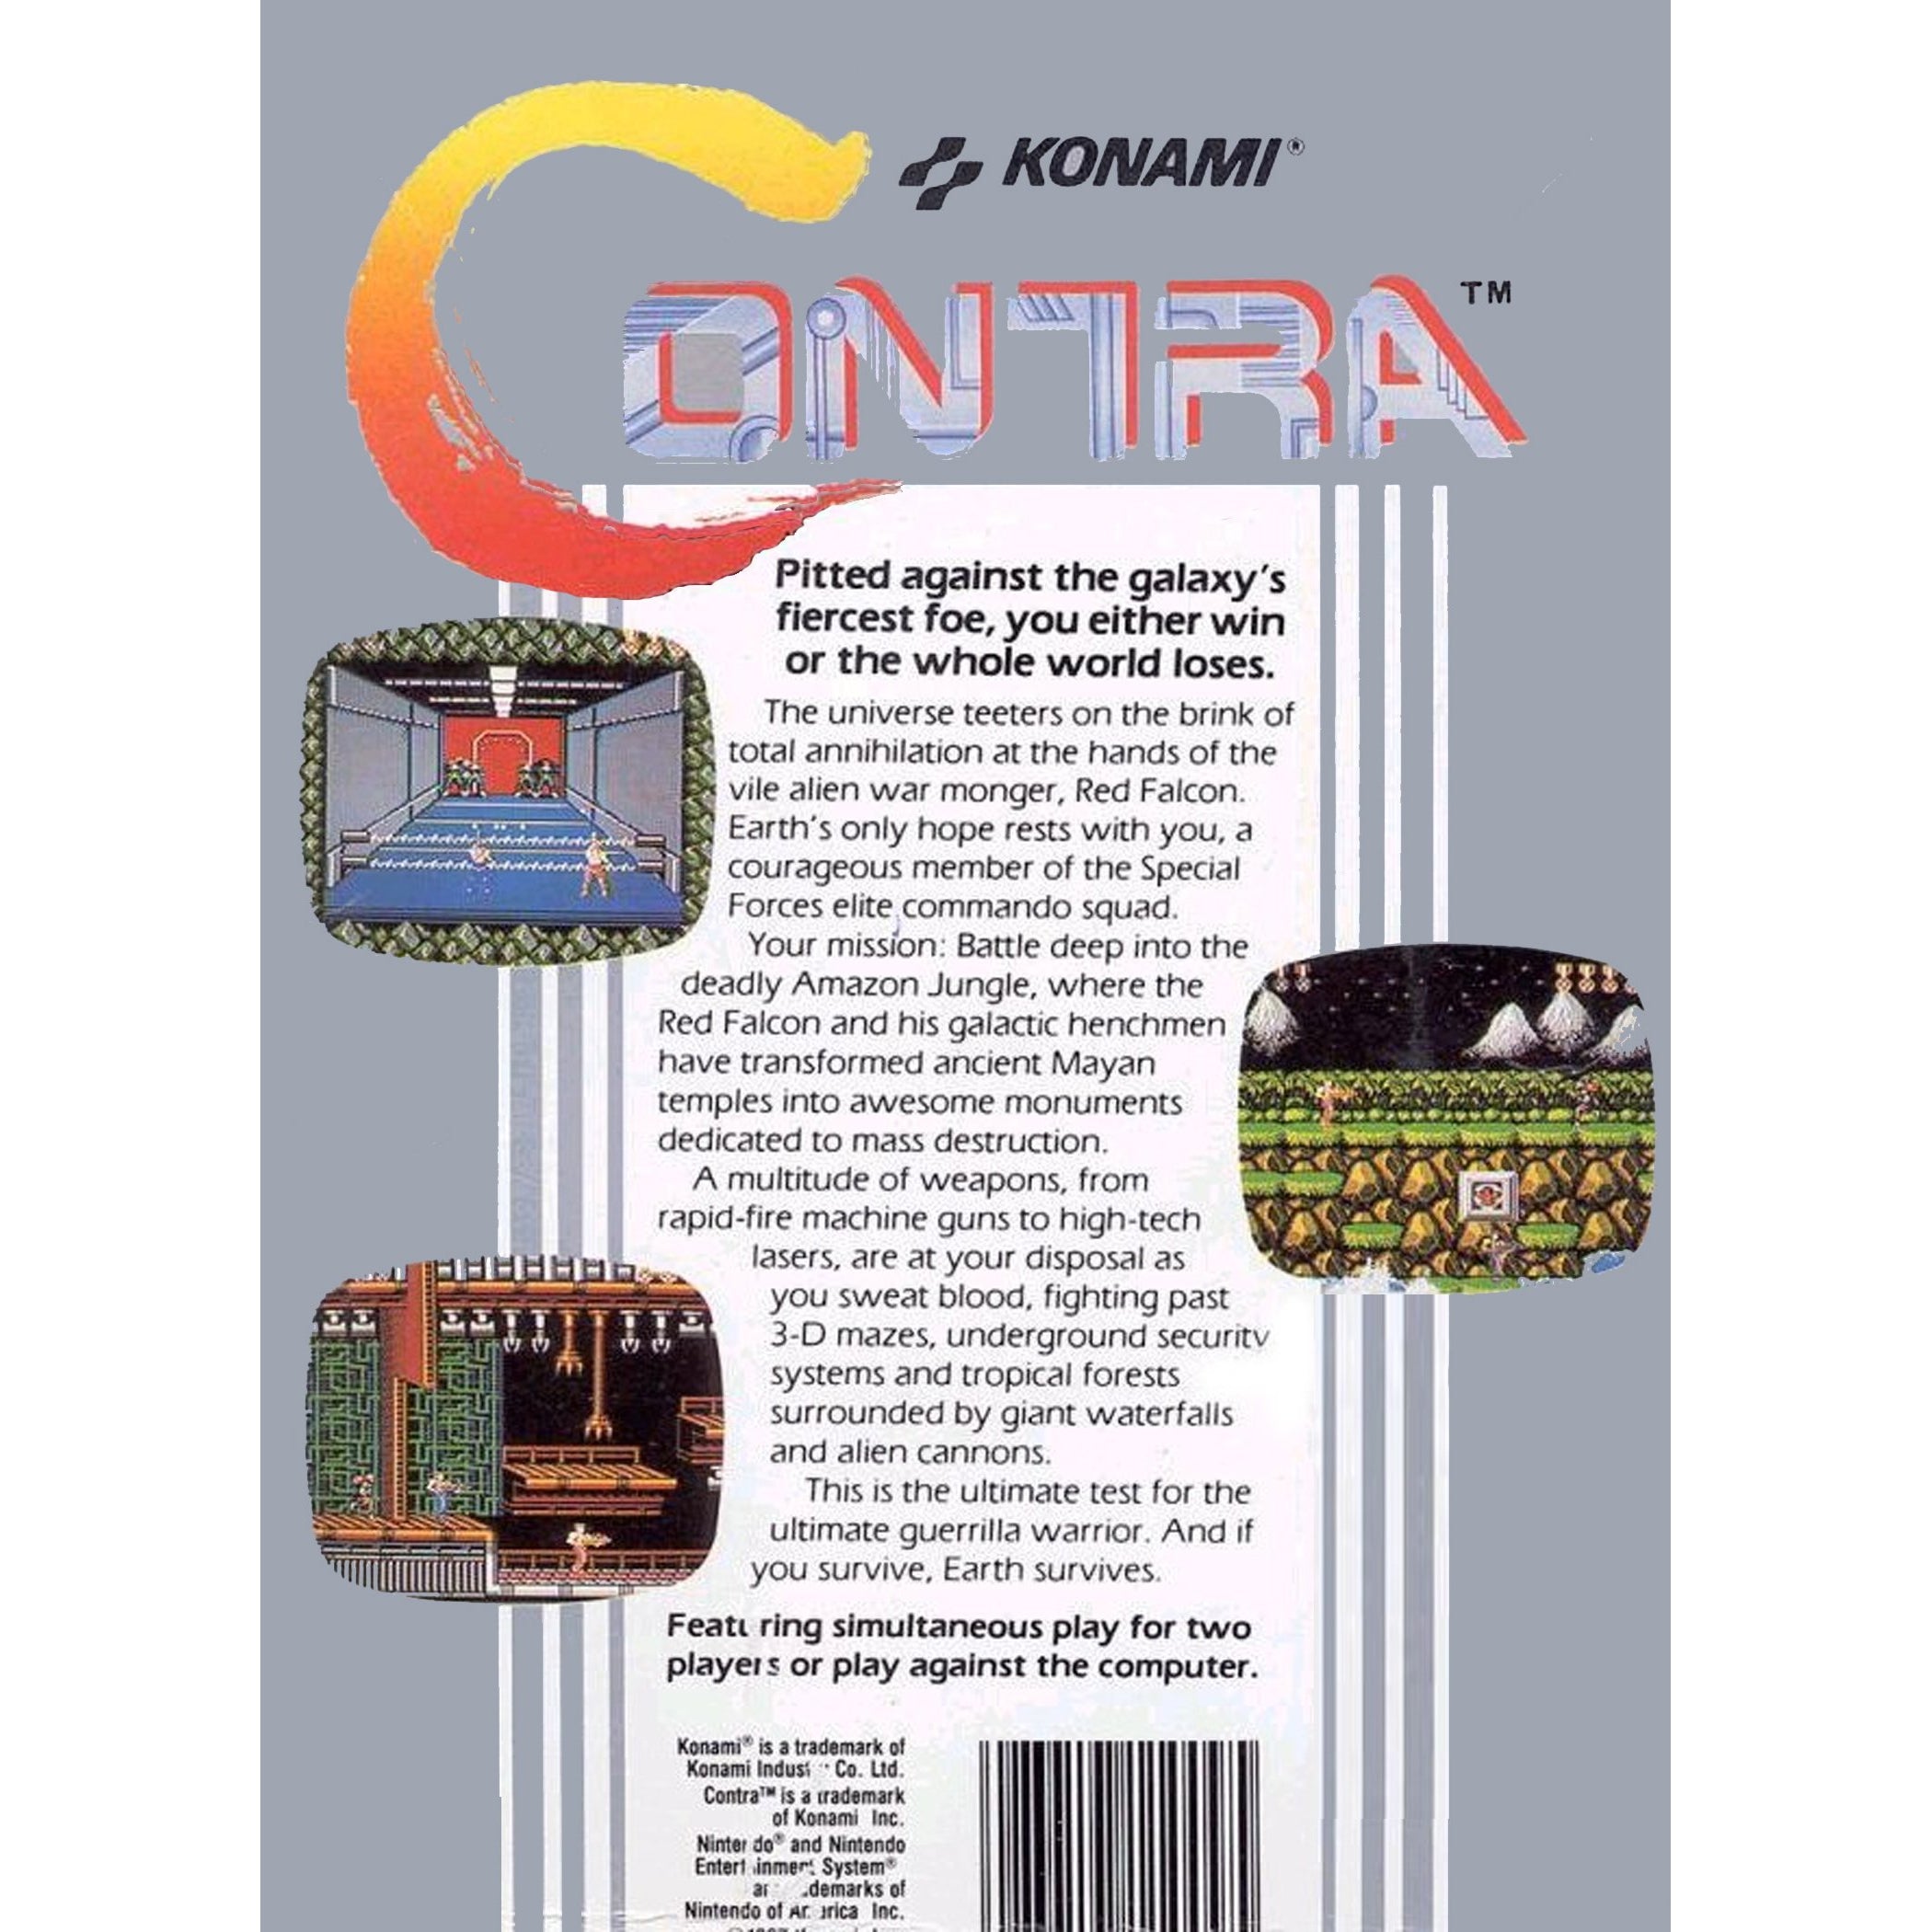 Contra - Authentic NES Game Cartridge - YourGamingShop.com - Buy, Sell, Trade Video Games Online. 120 Day Warranty. Satisfaction Guaranteed.